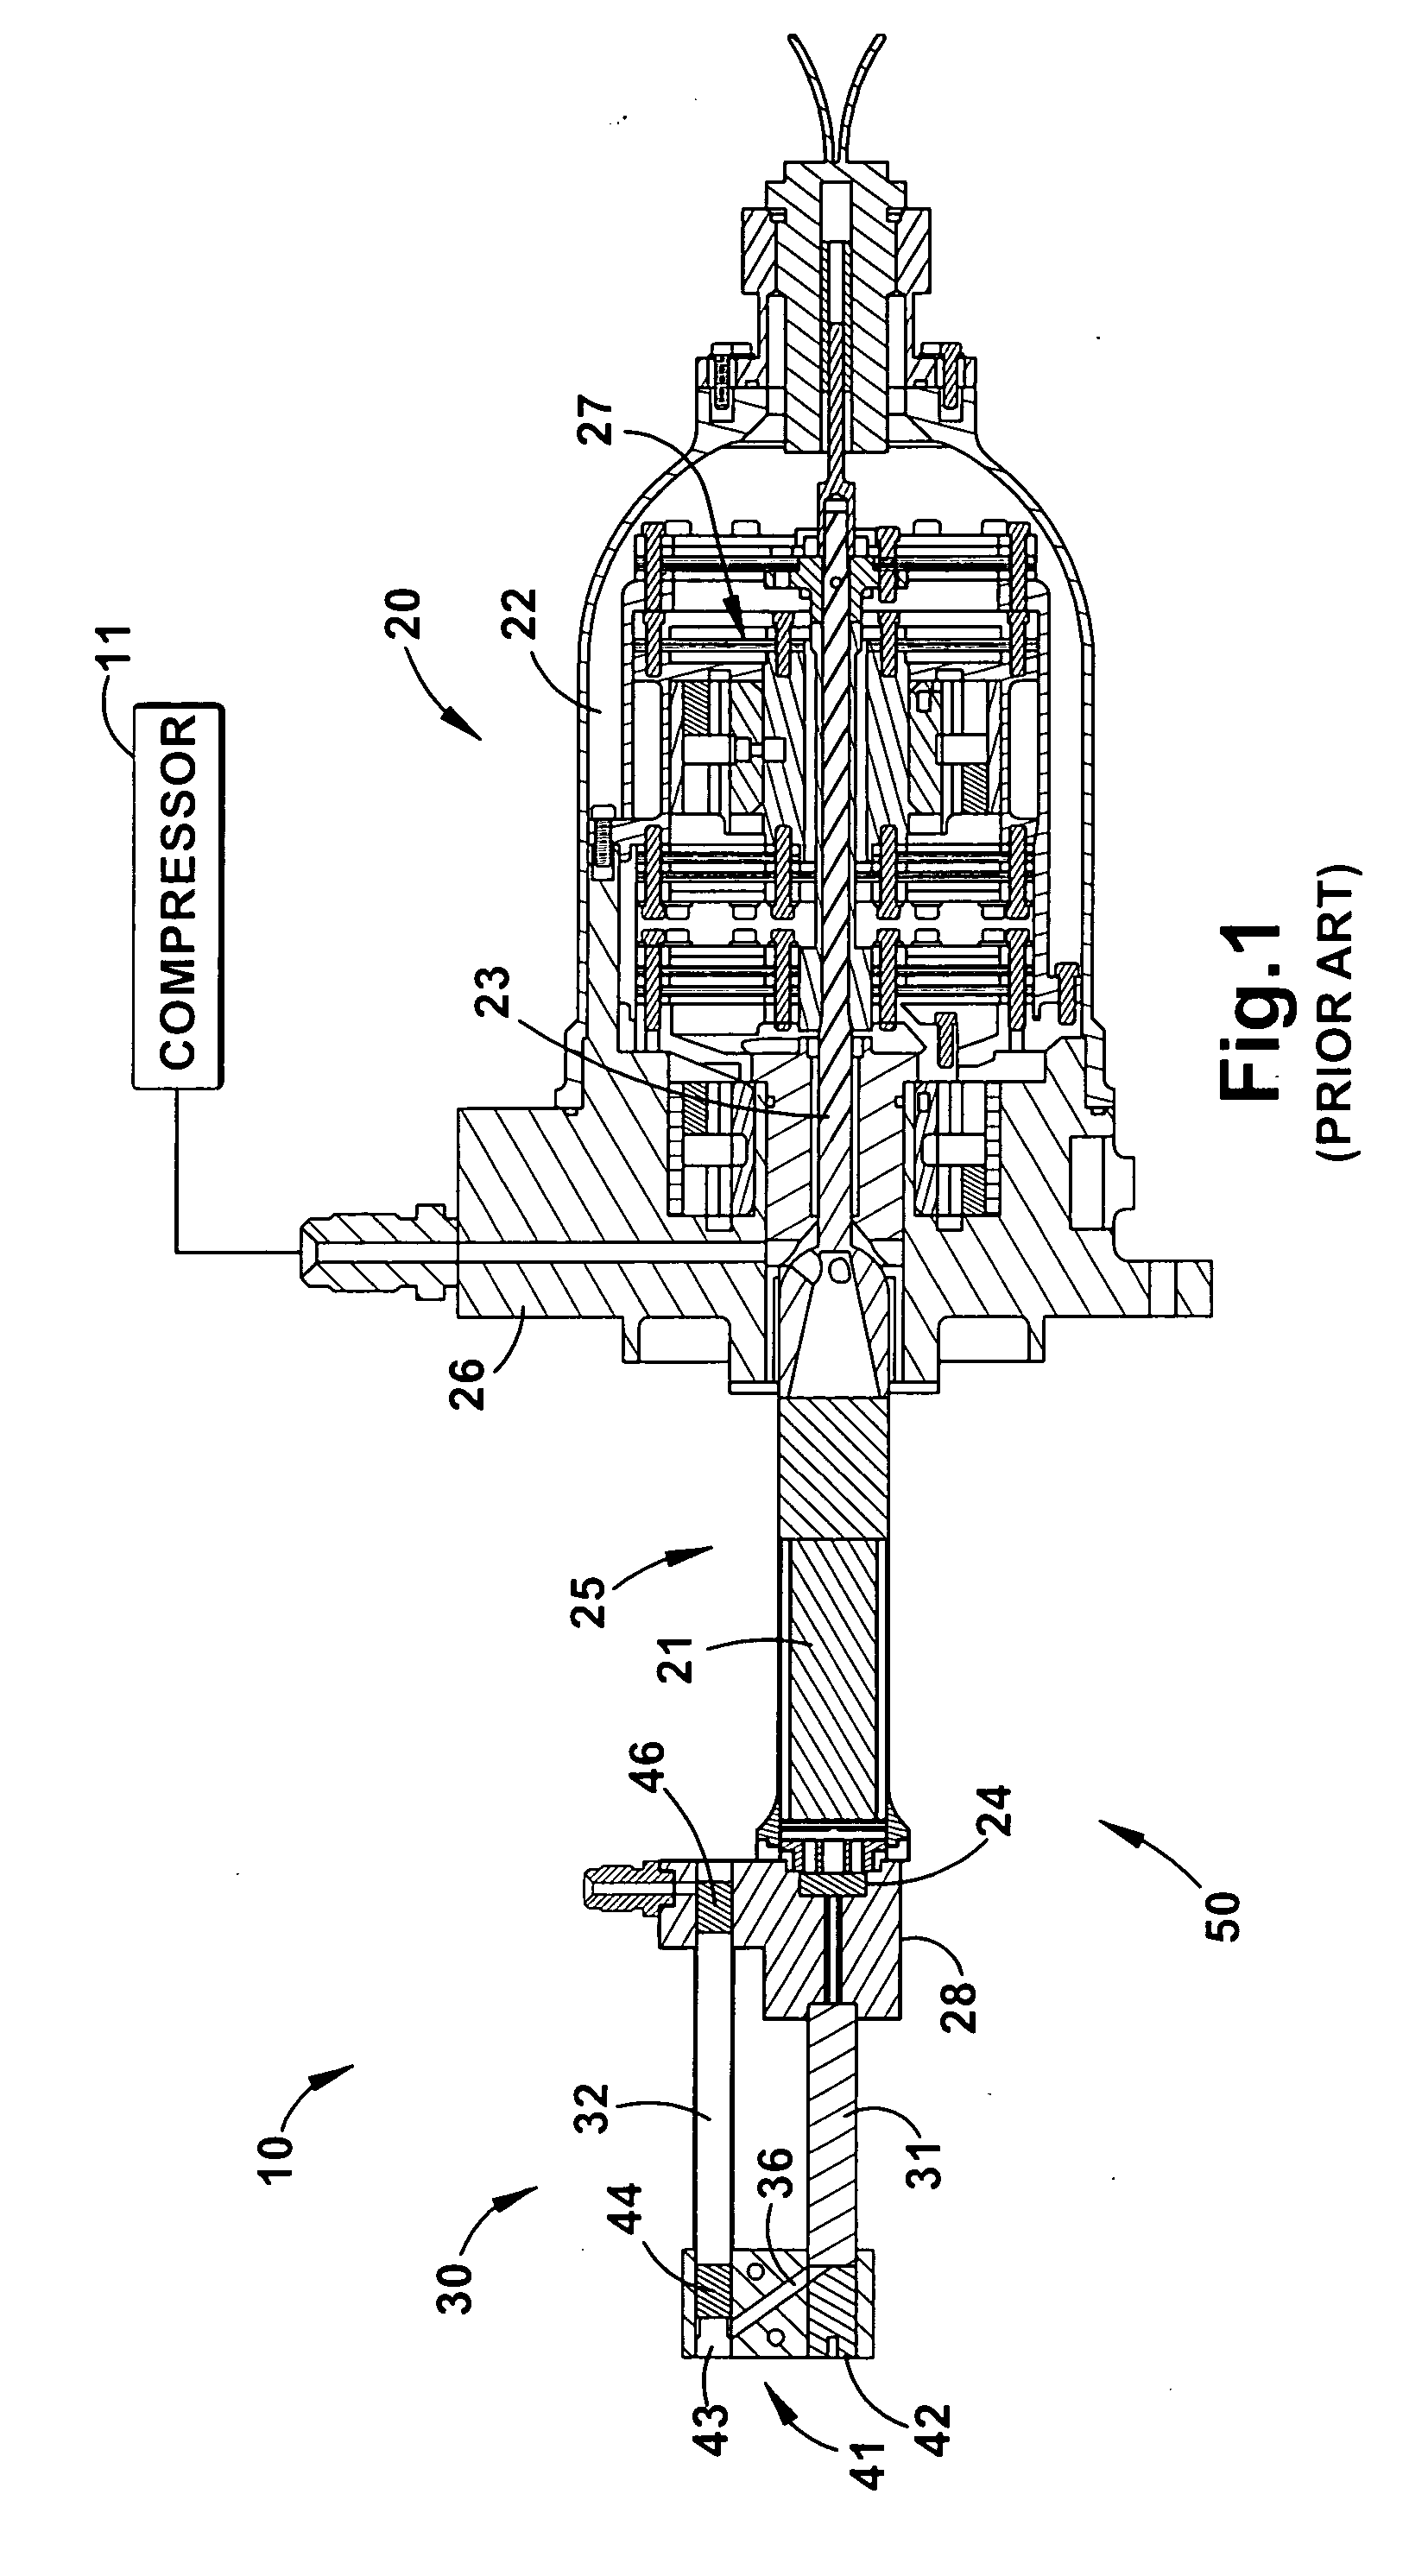 Hybrid cryocooler with multiple passive stages